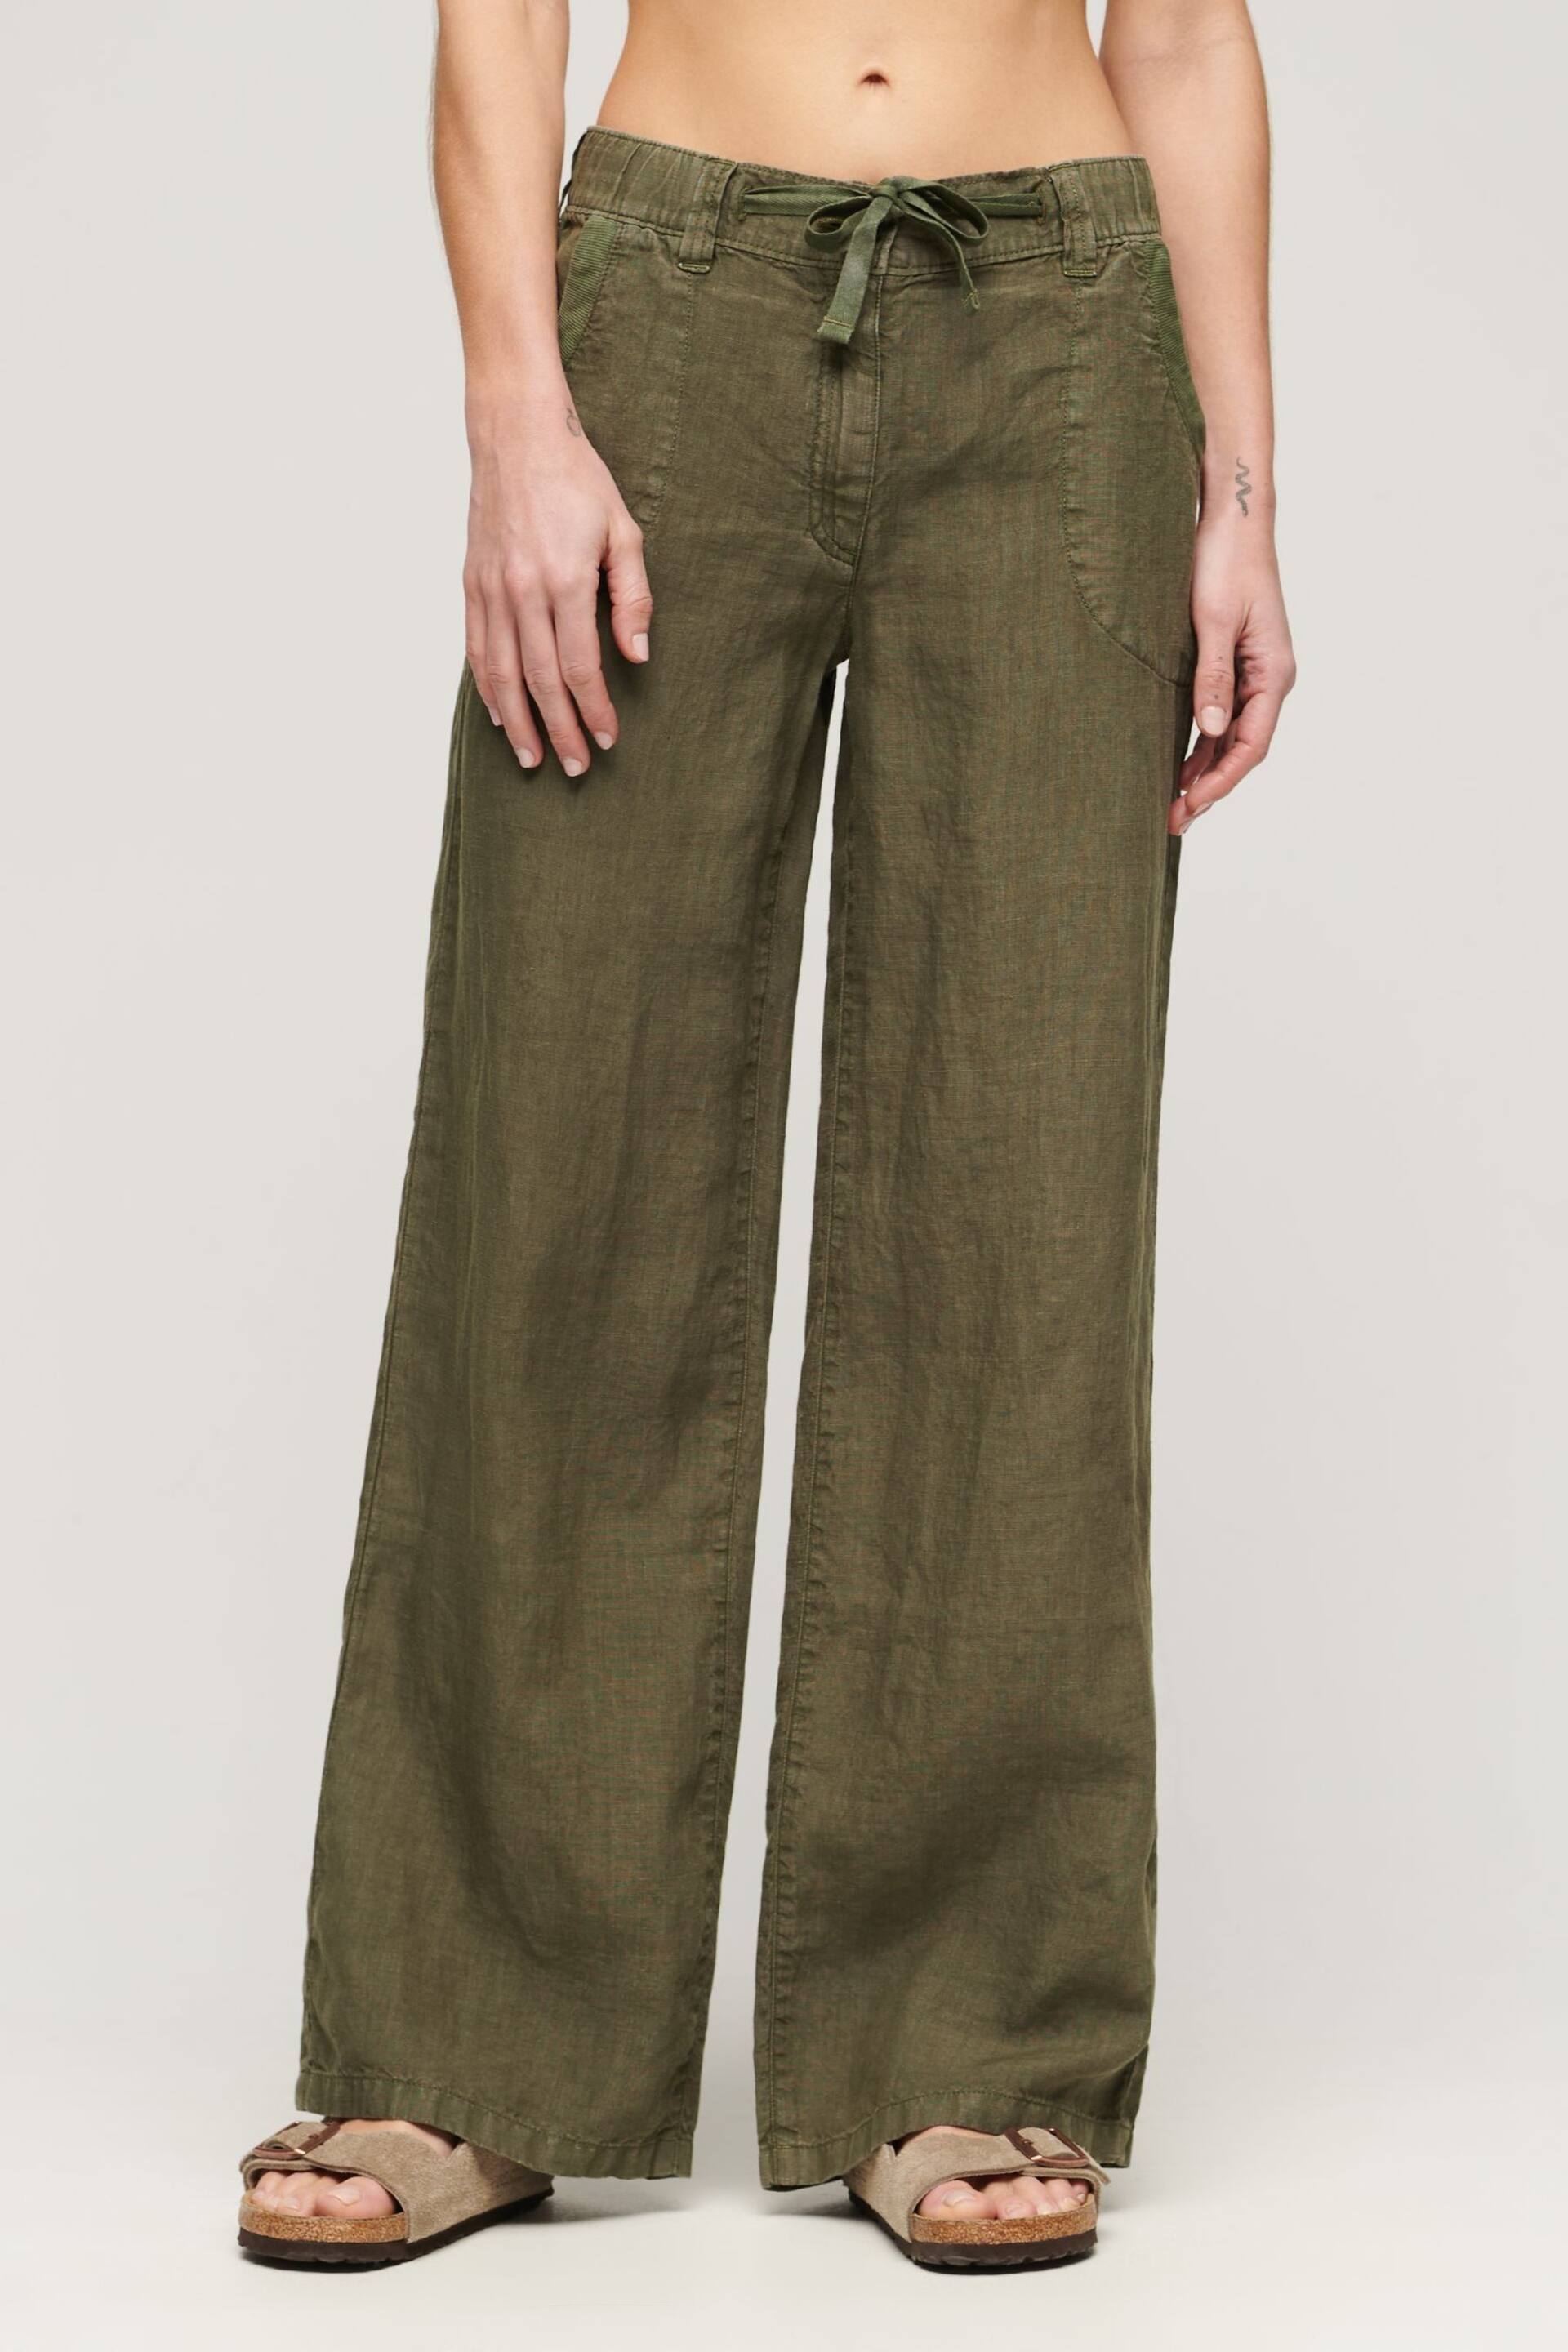 Superdry Green Linen Low Rise Trousers - Image 1 of 6